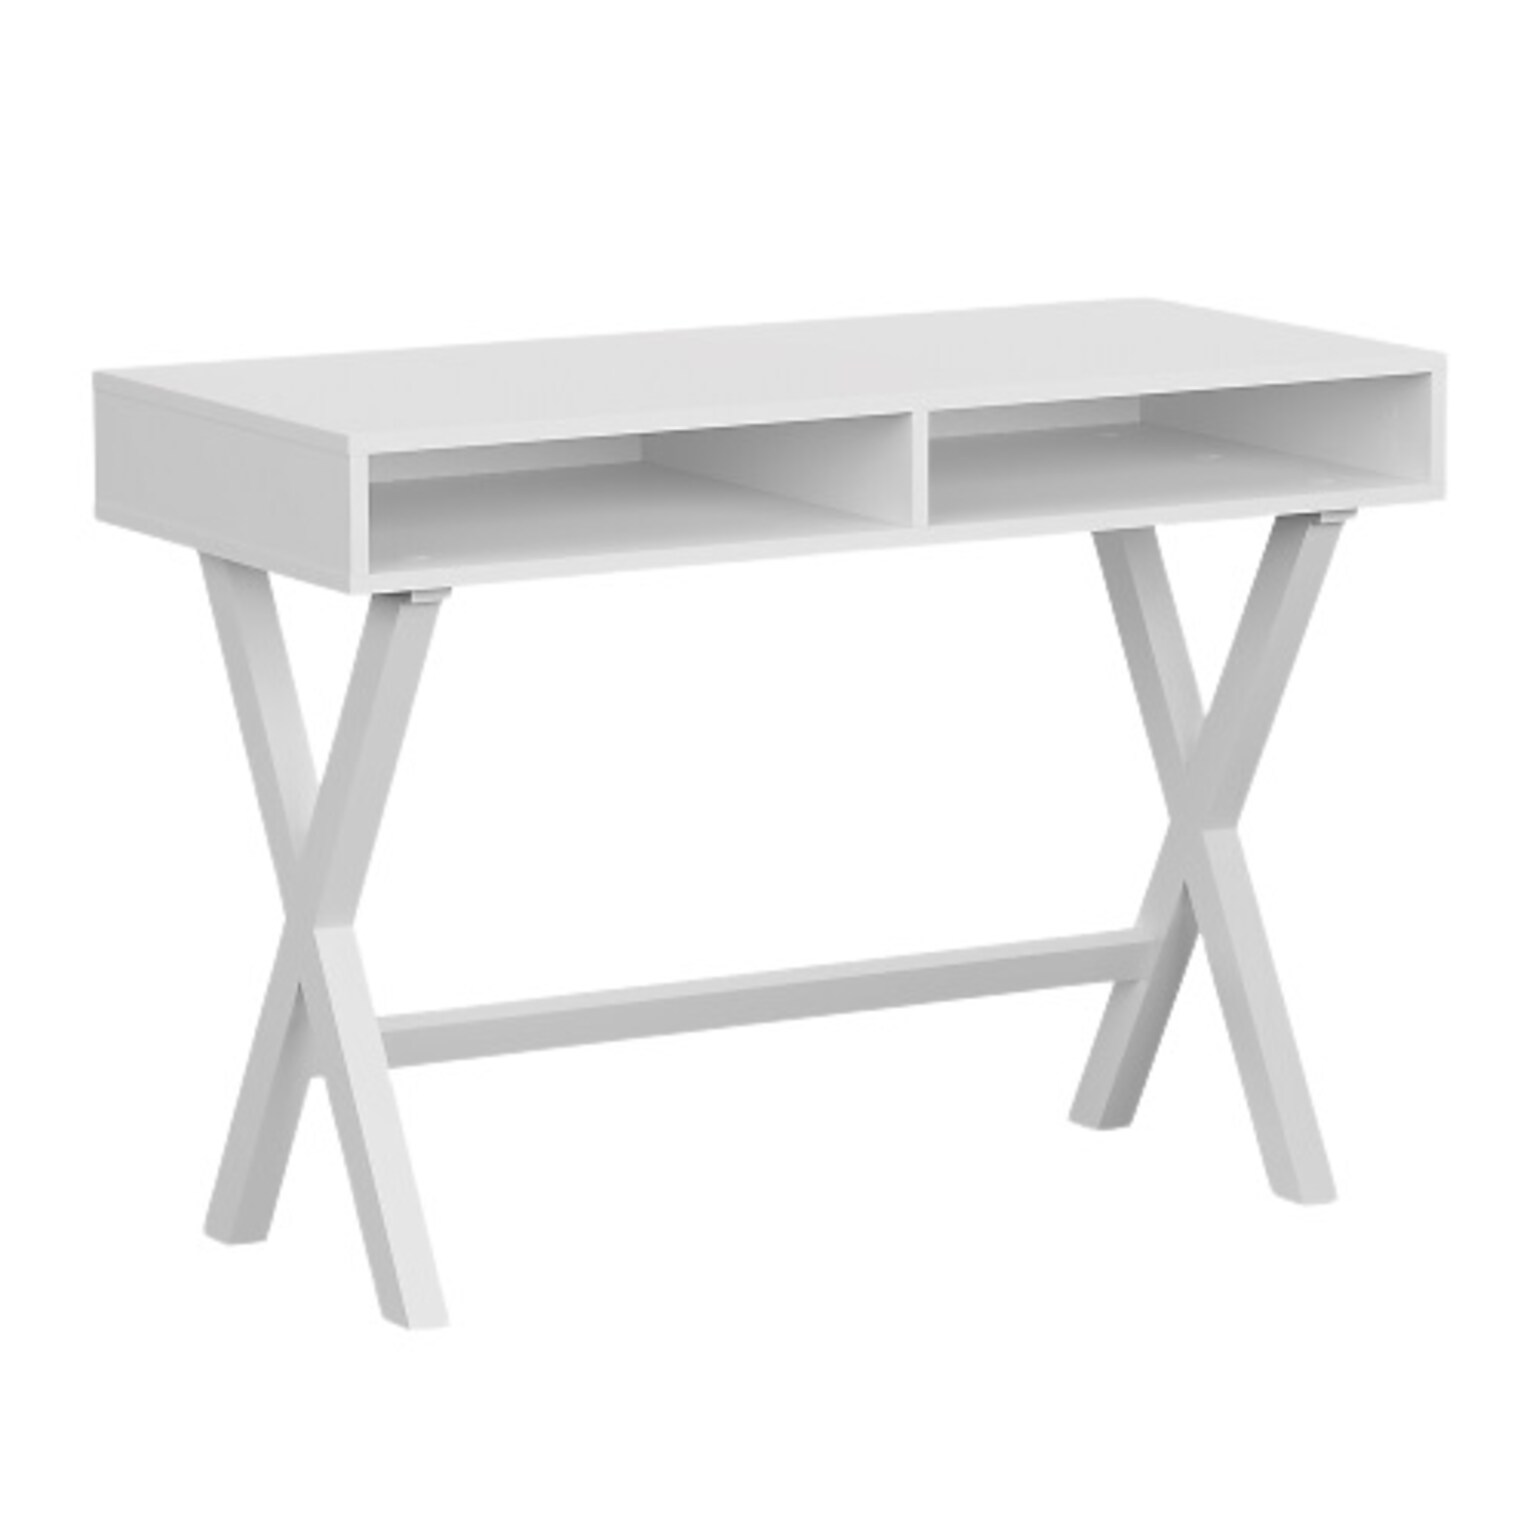 Flash Furniture 42 Home Office Writing Computer Desk with Open Storage Compartments, White (GCMBLK61WH)